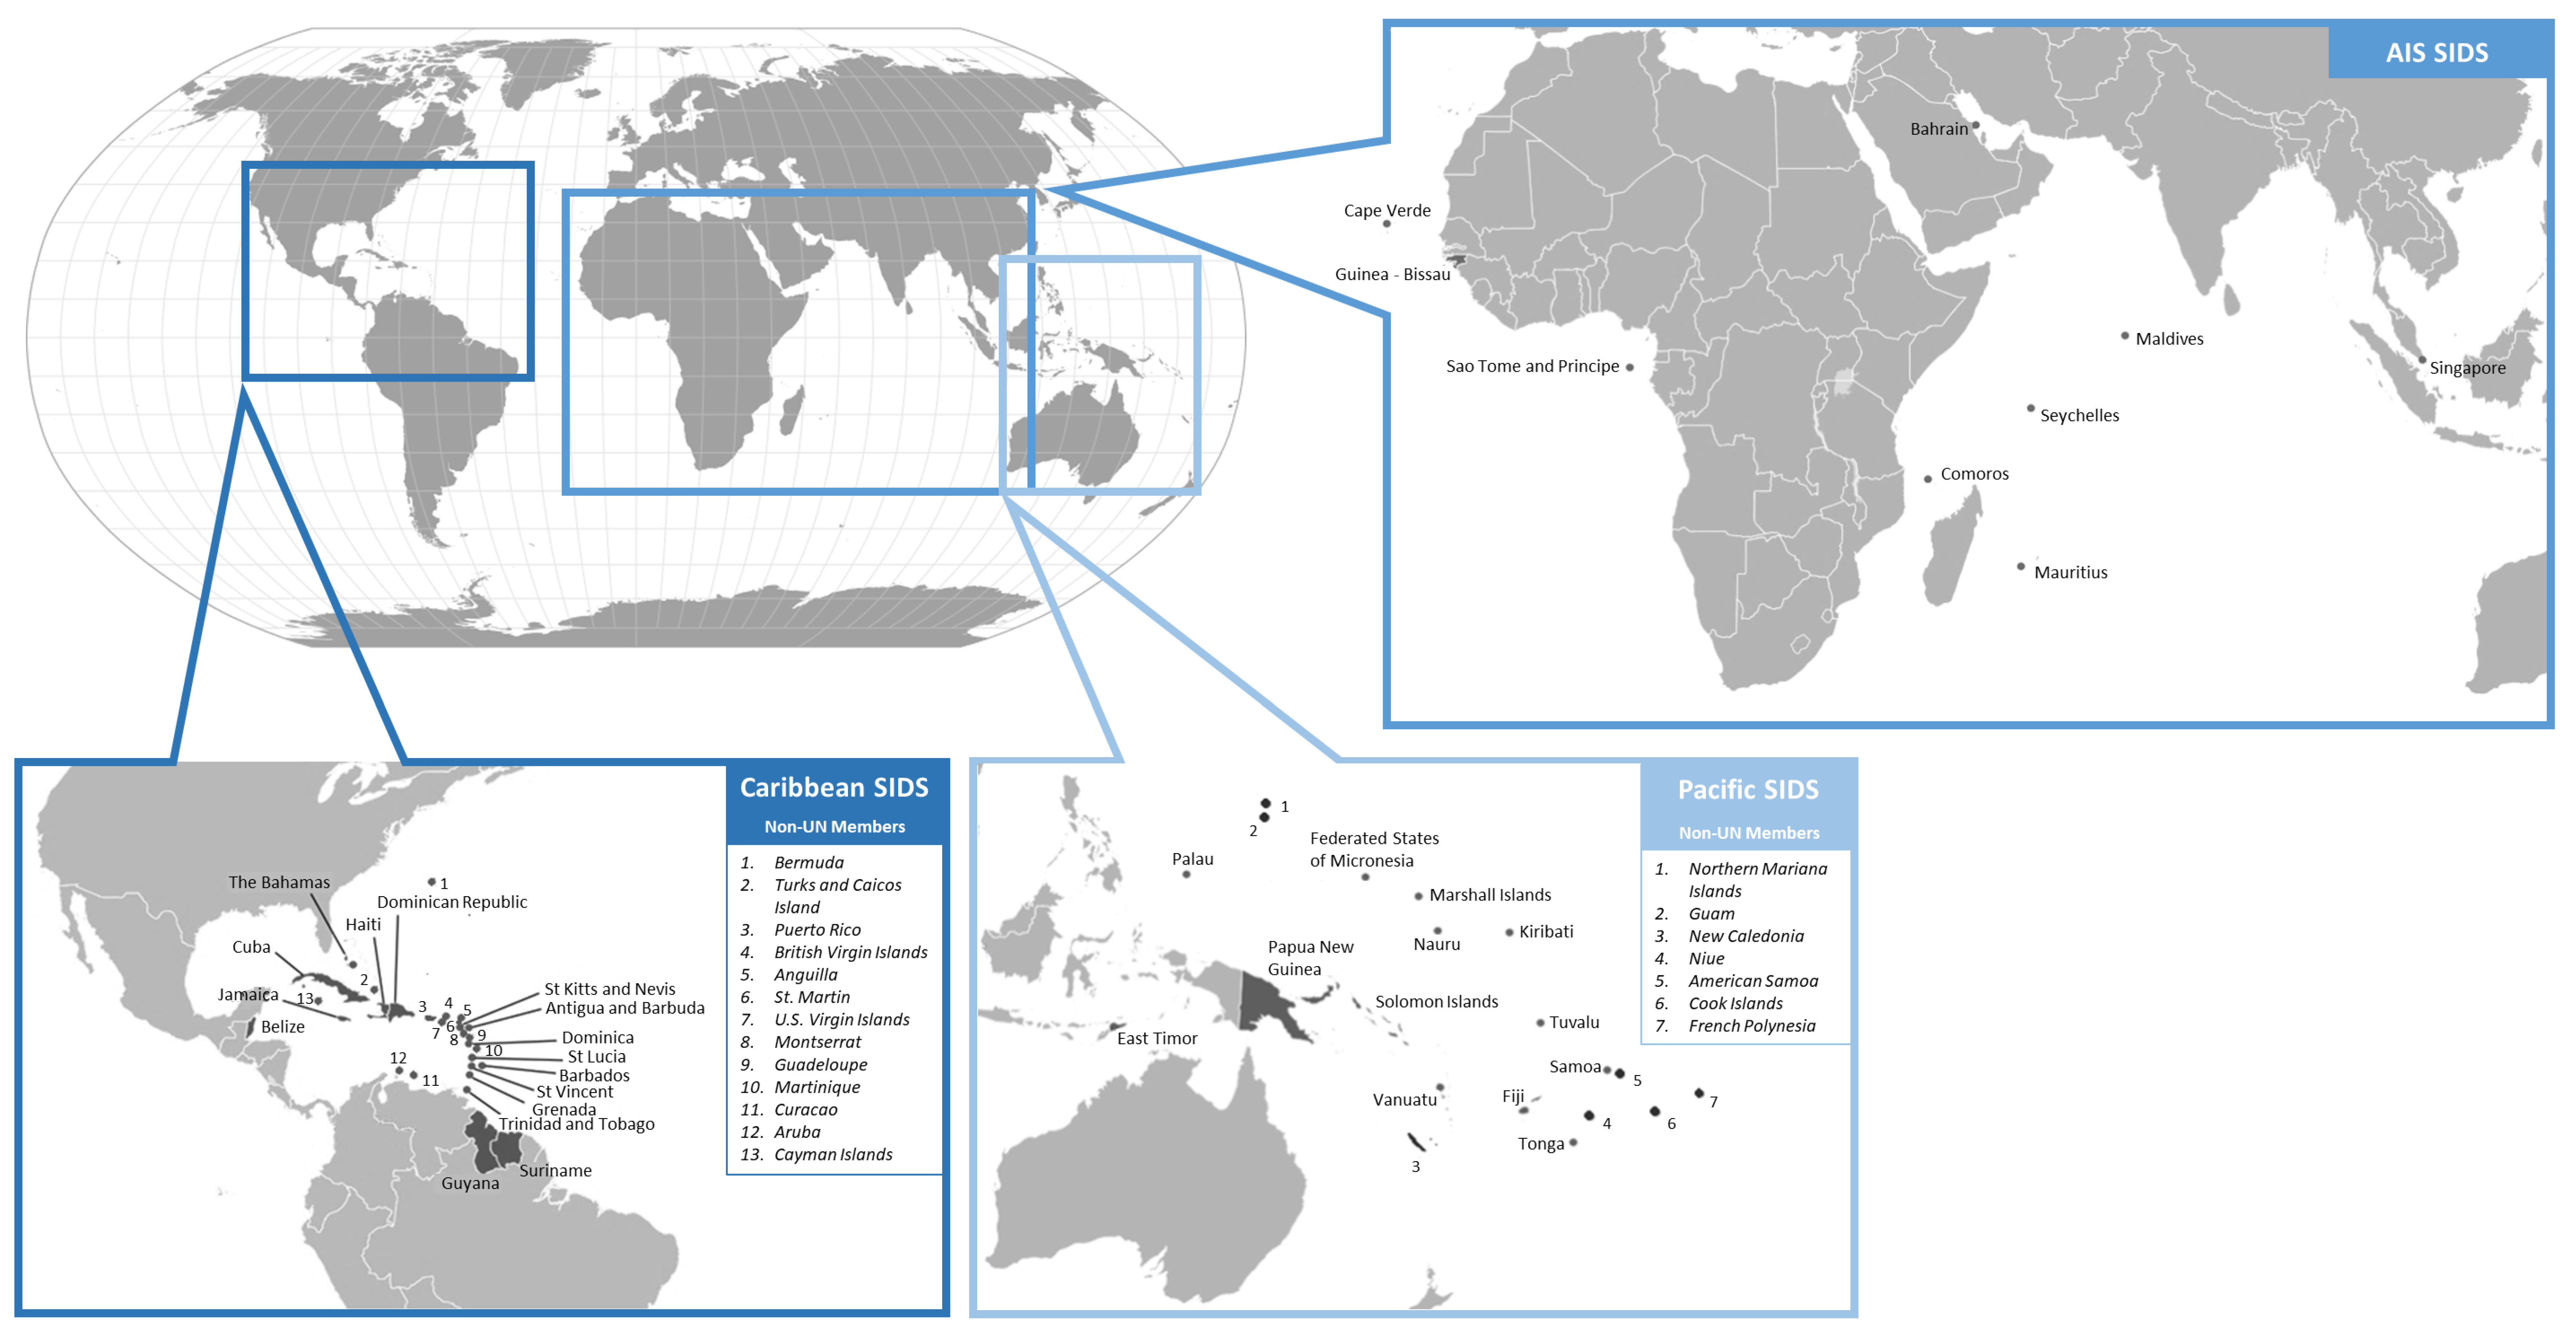 Small Island Developing States (SIDS). AIS: Atlantic, Indian Ocean, and South China Seas. Geographical regions of Small Island Developing States (SIDS). AIS: Atlantic, Indian Ocean, and South China Seas. | UPSC